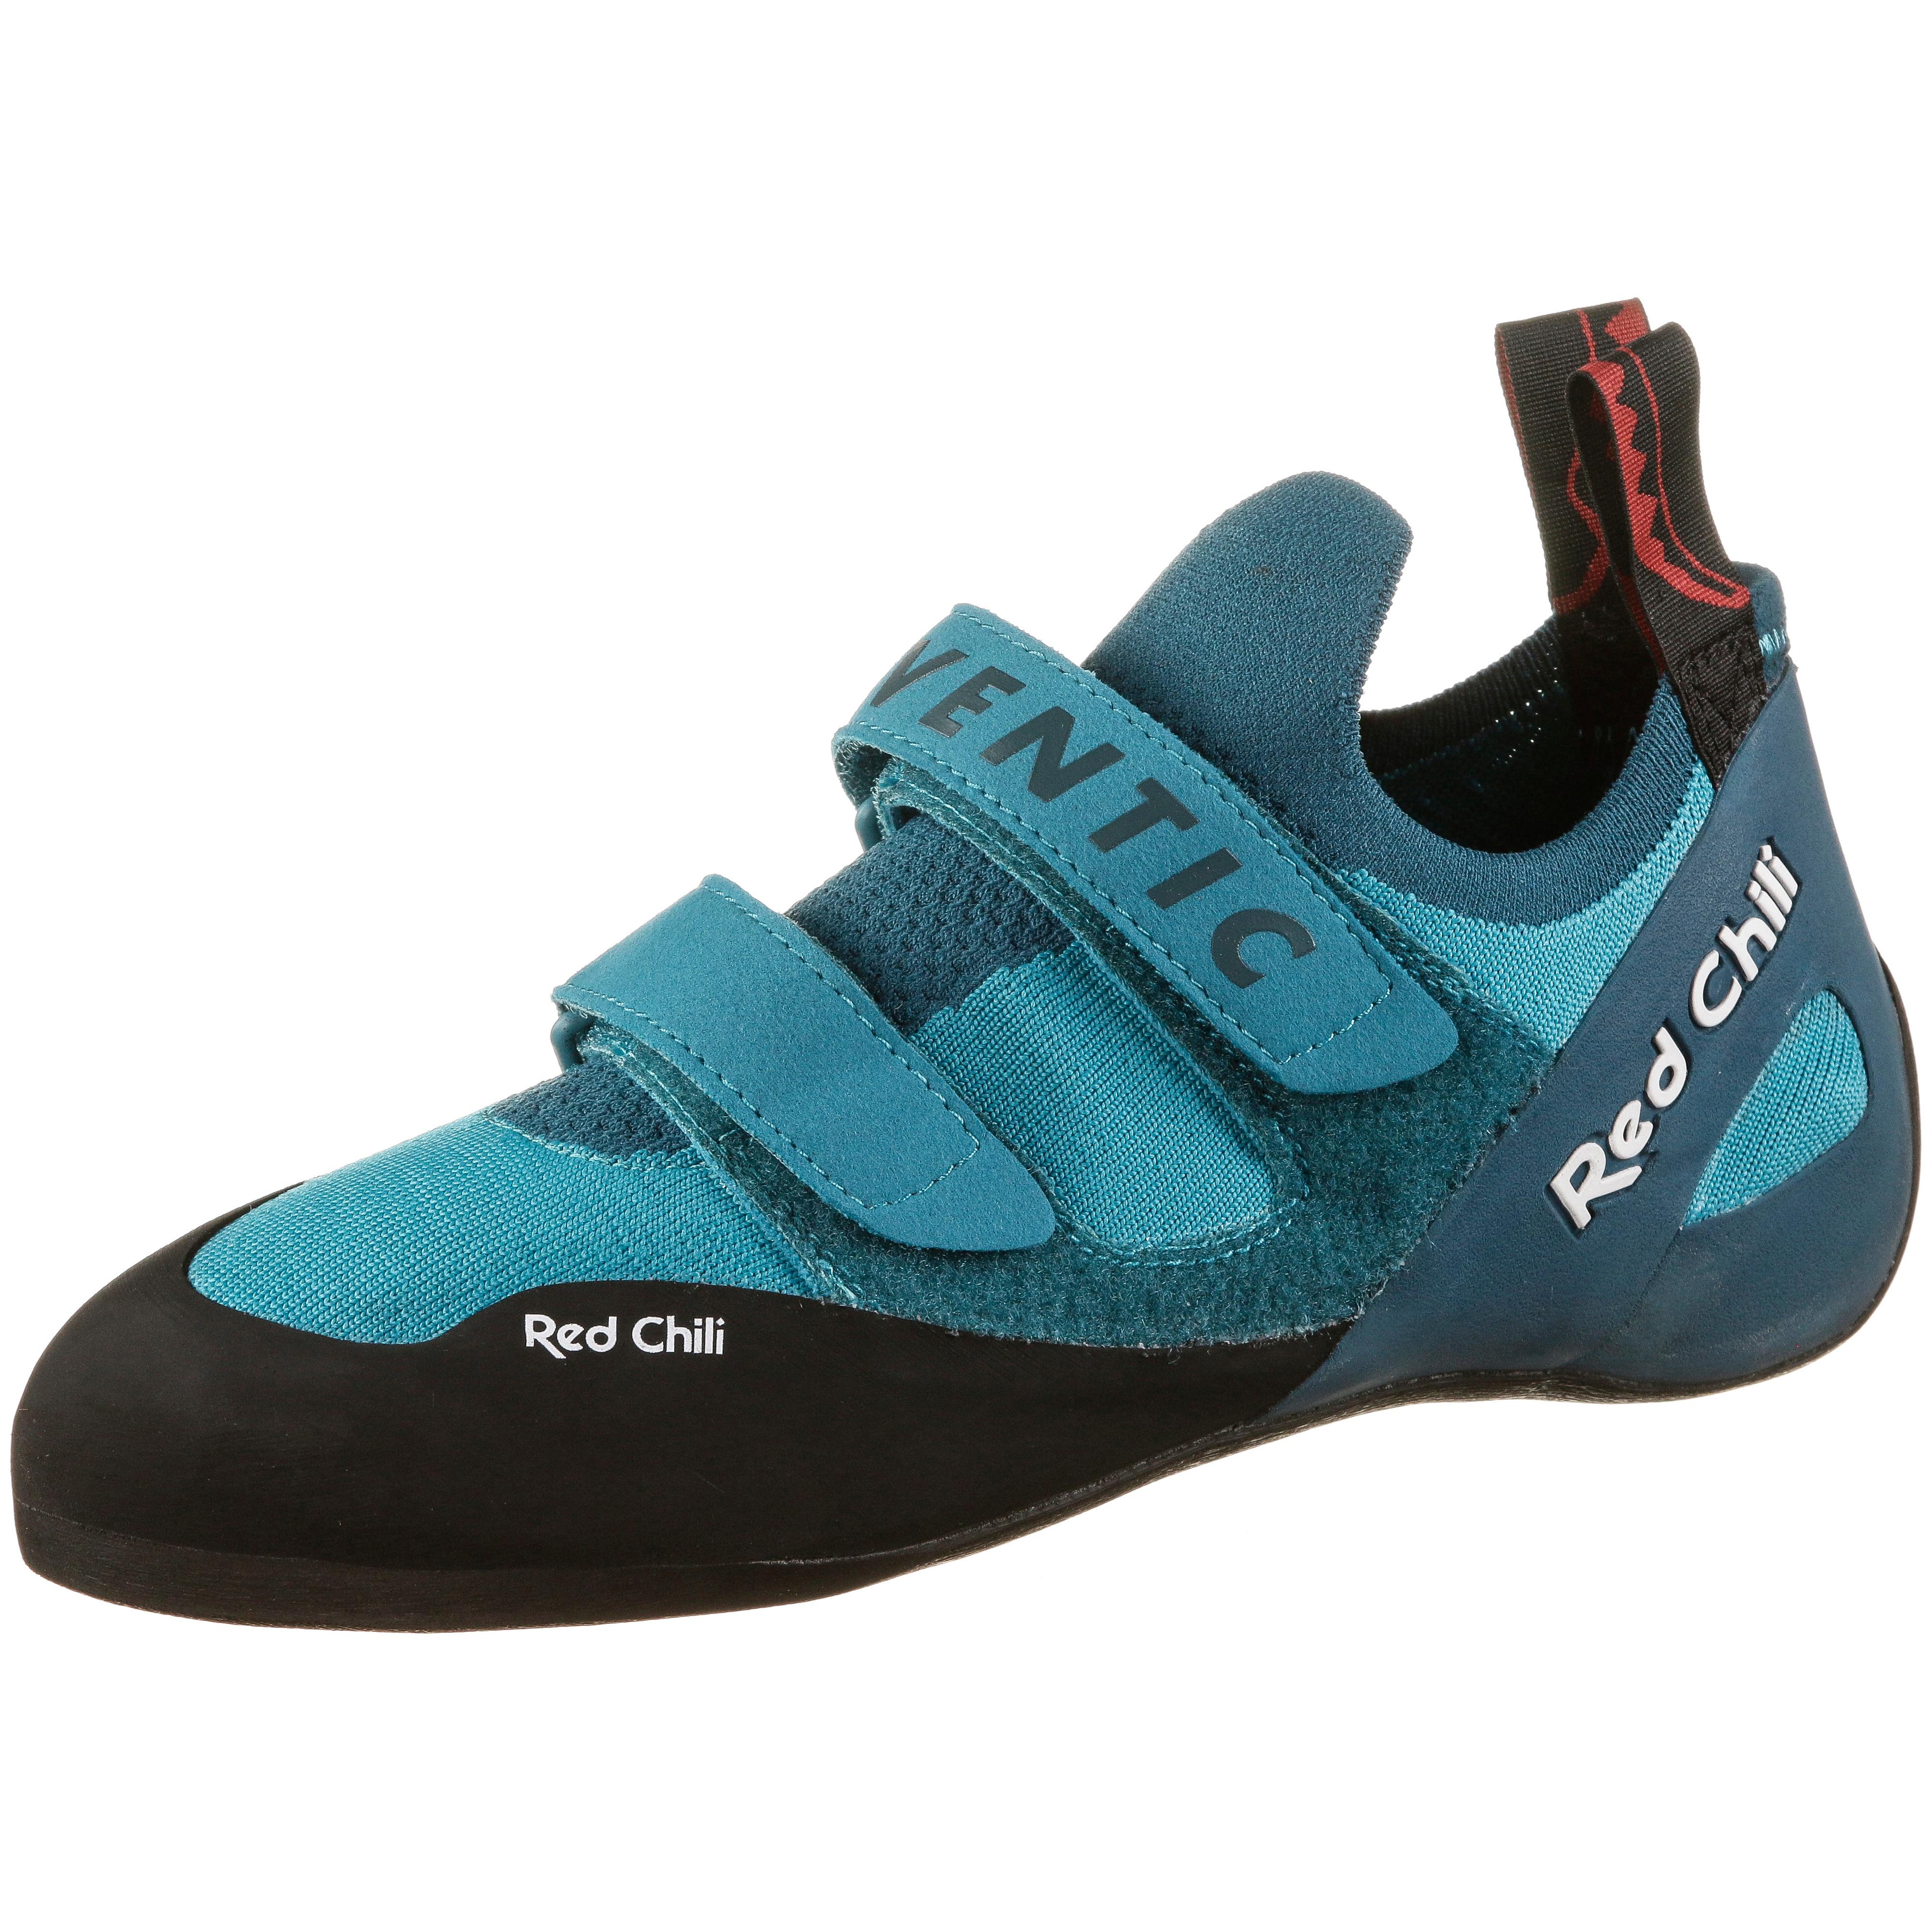 Image of Red Chili Ventic Air Kletterschuhe